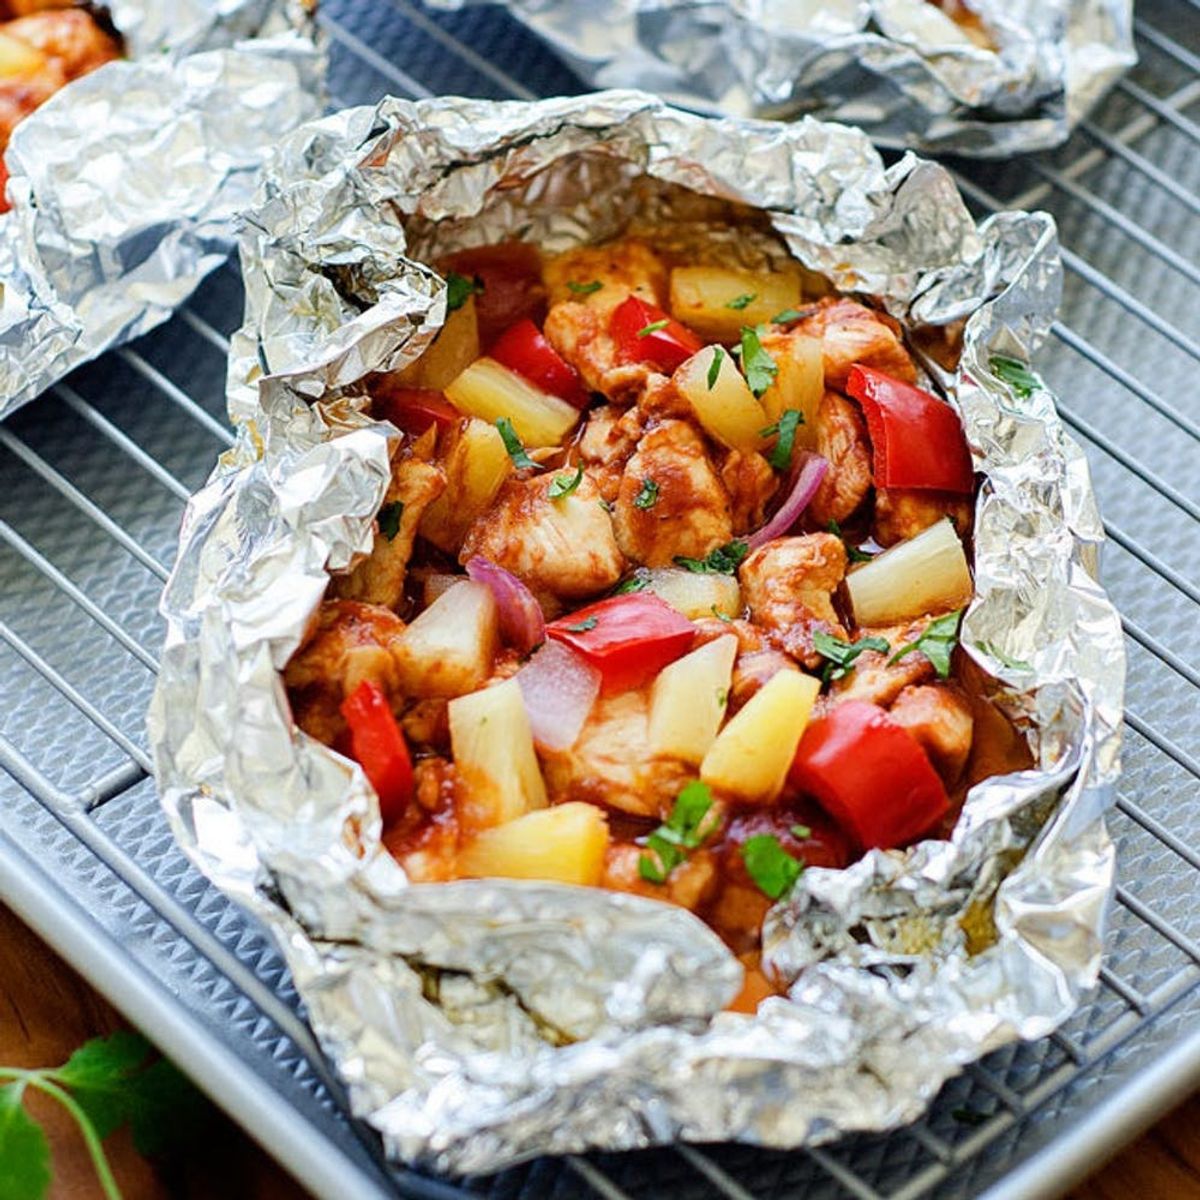 BBQ chicken foil packs are one of our favorite camping recipes